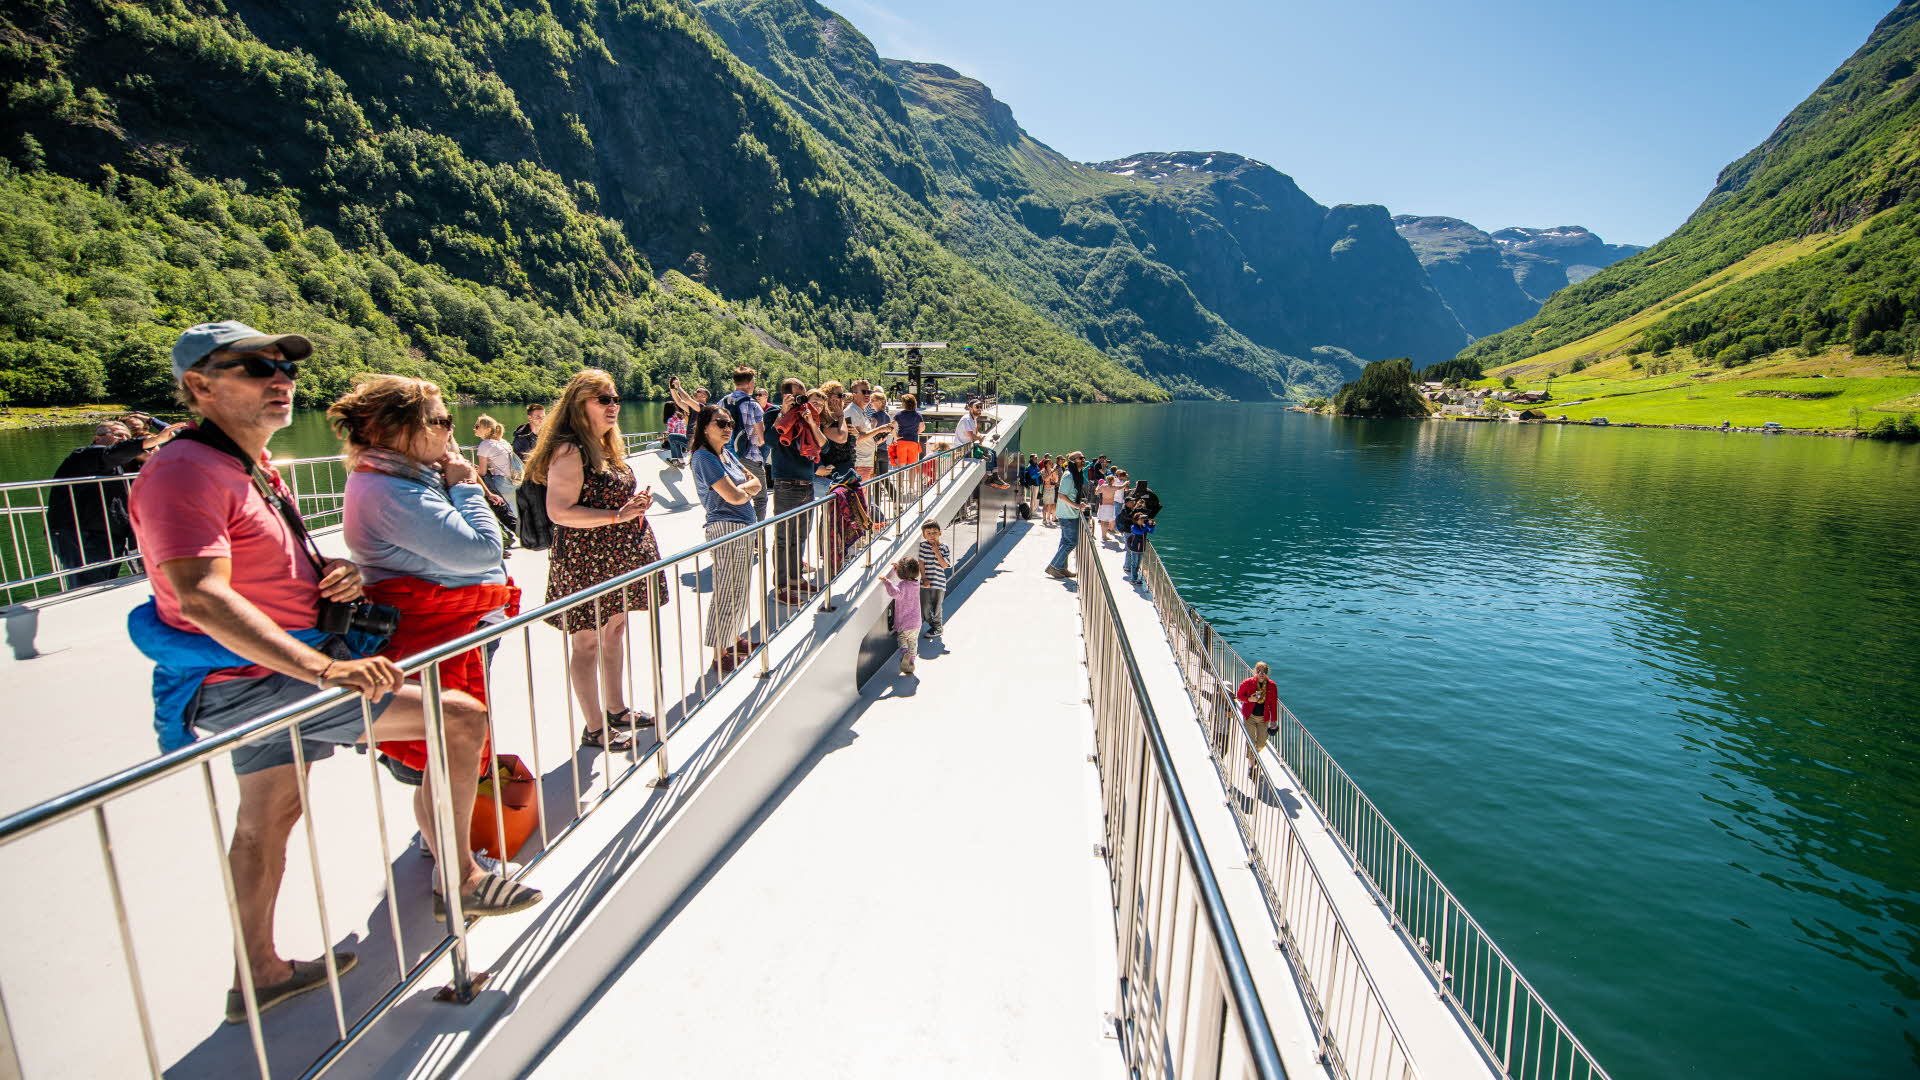 People standing outside by winding rails on board Future of The Fjords in UNESCO listed Nærøyfjord in summer